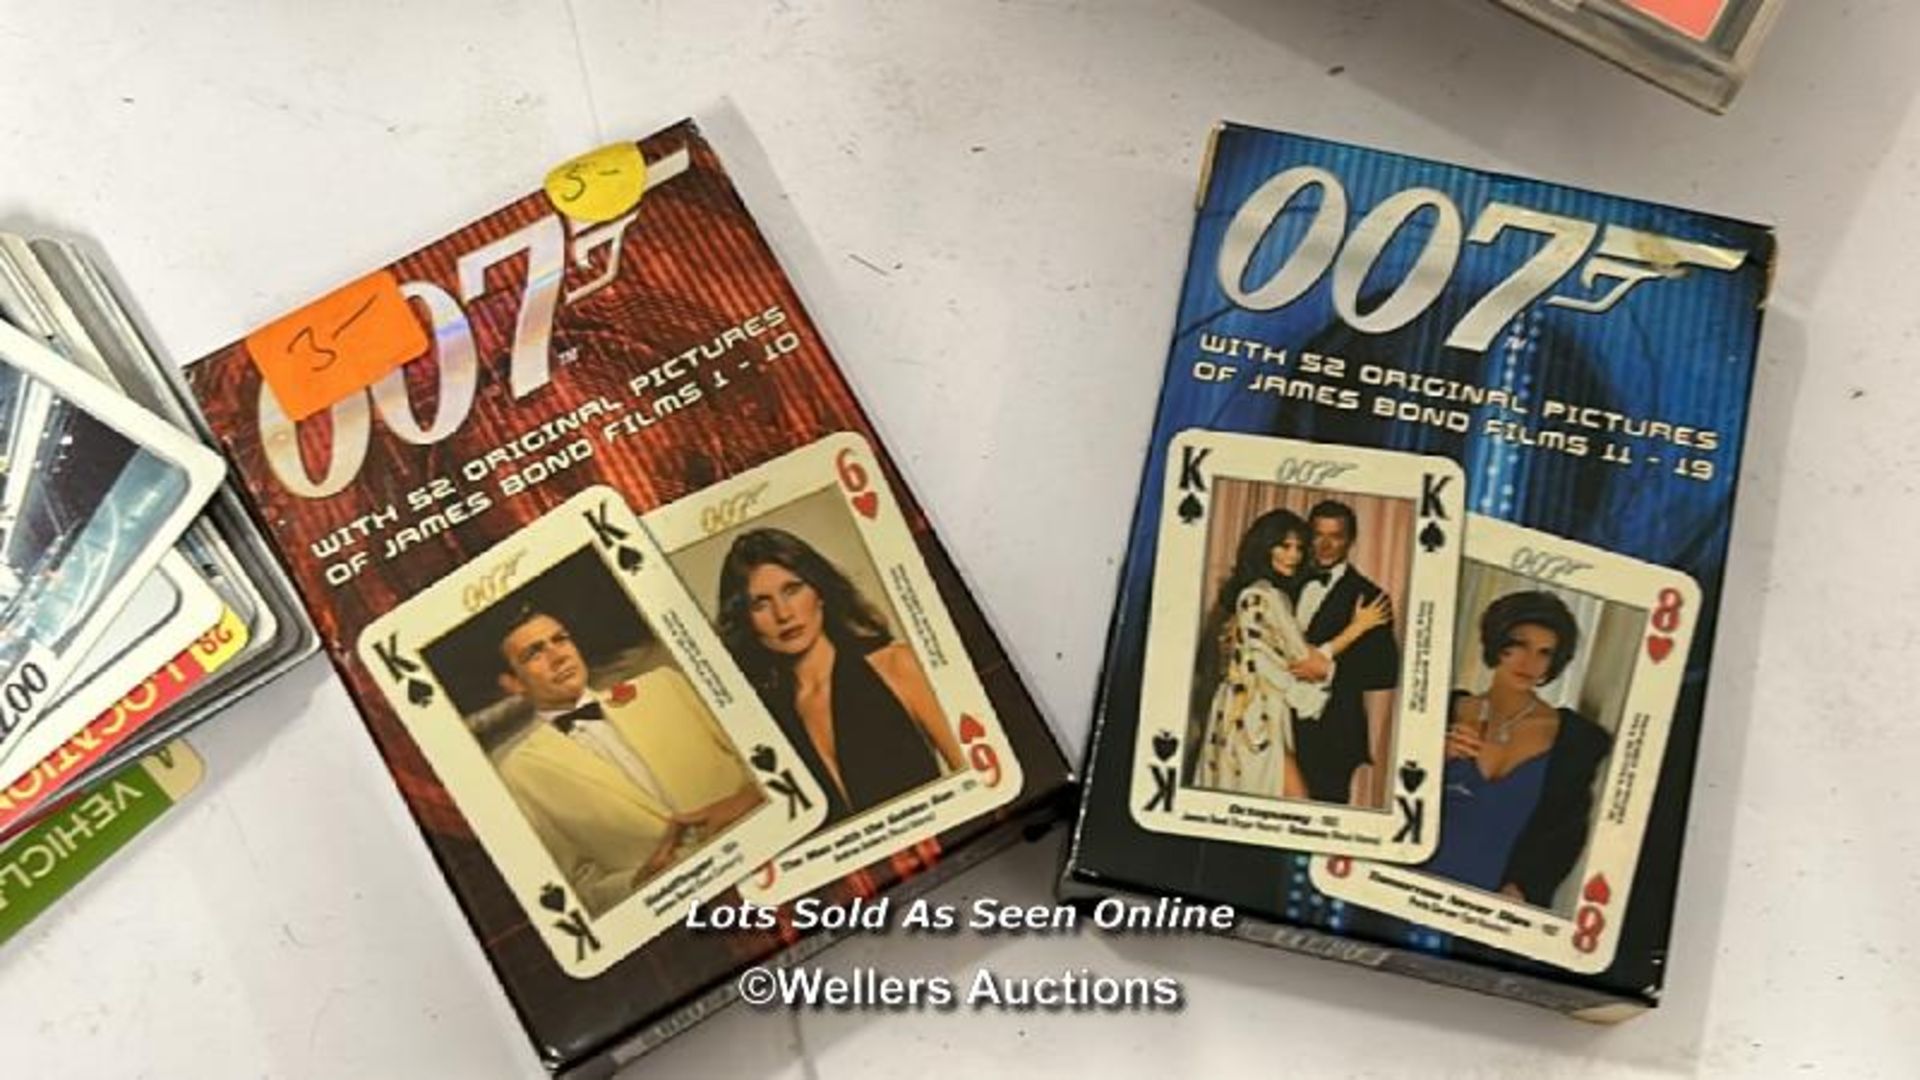 James Bond - Collectors cards, magazines, playing cards and sealed DVD box set / AN8 - Image 5 of 8